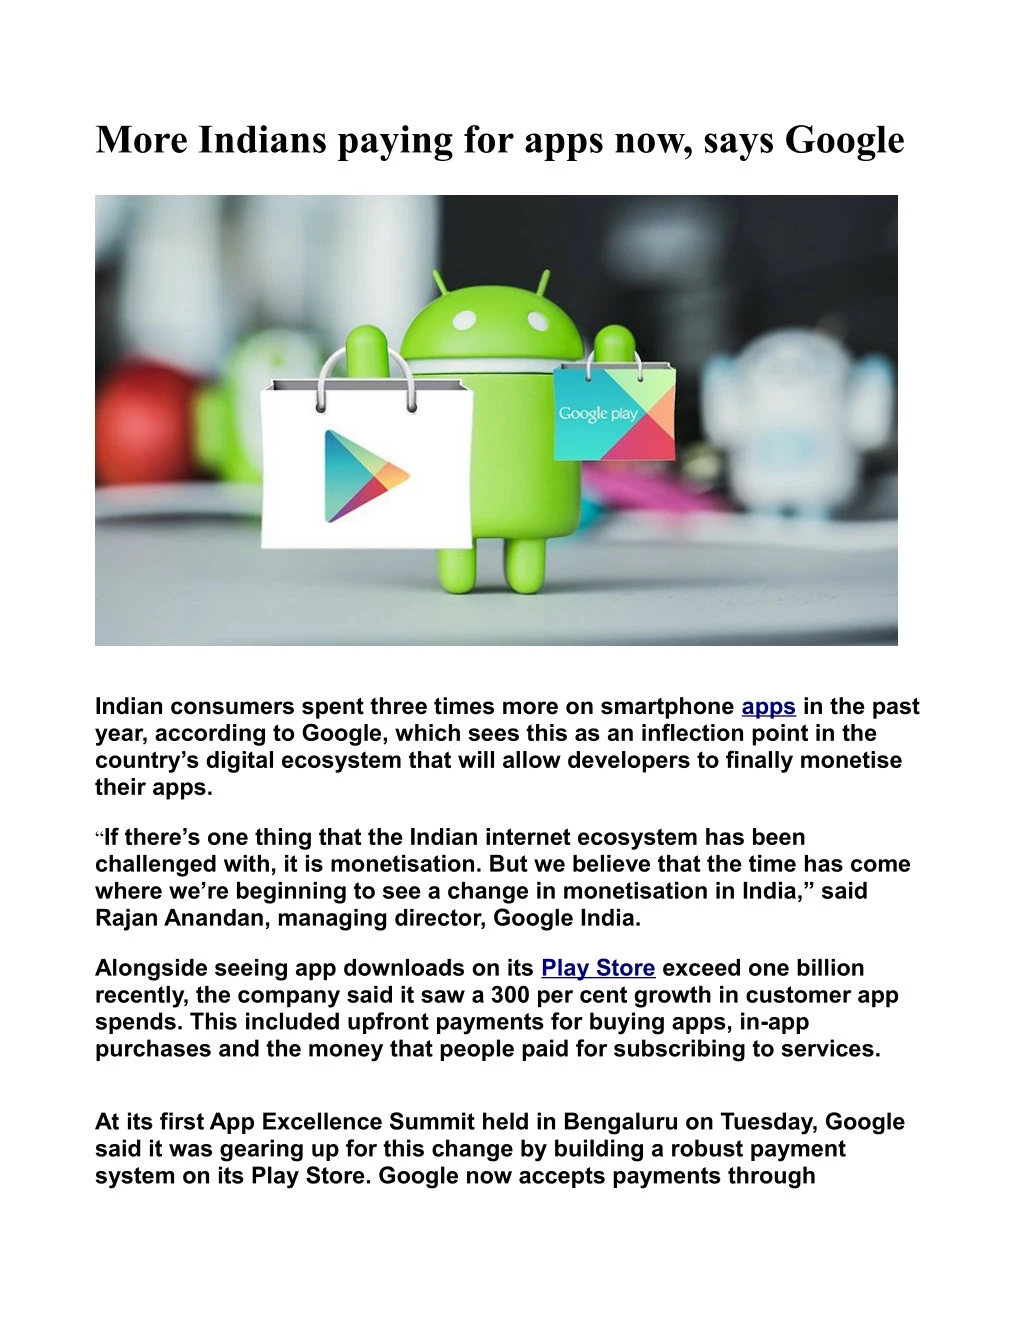 more indians paying for apps now says google